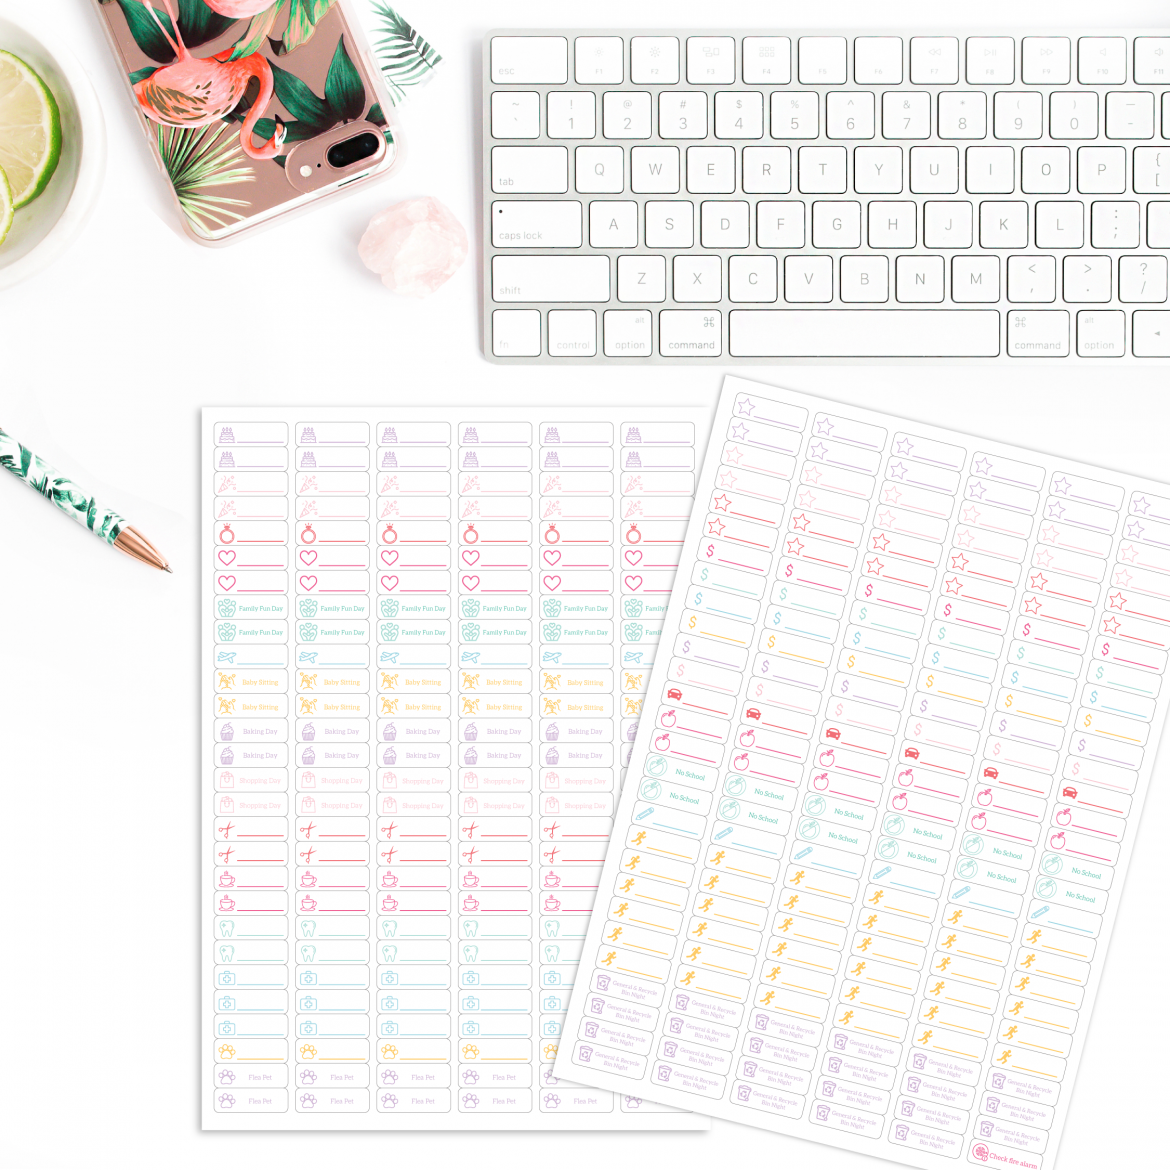 We have been working really hard here at Organised HQ designing The Organised Housewife 2019 Calendar and PRE-ORDERS ARE NOW OPEN! Here's a little sneak peek....